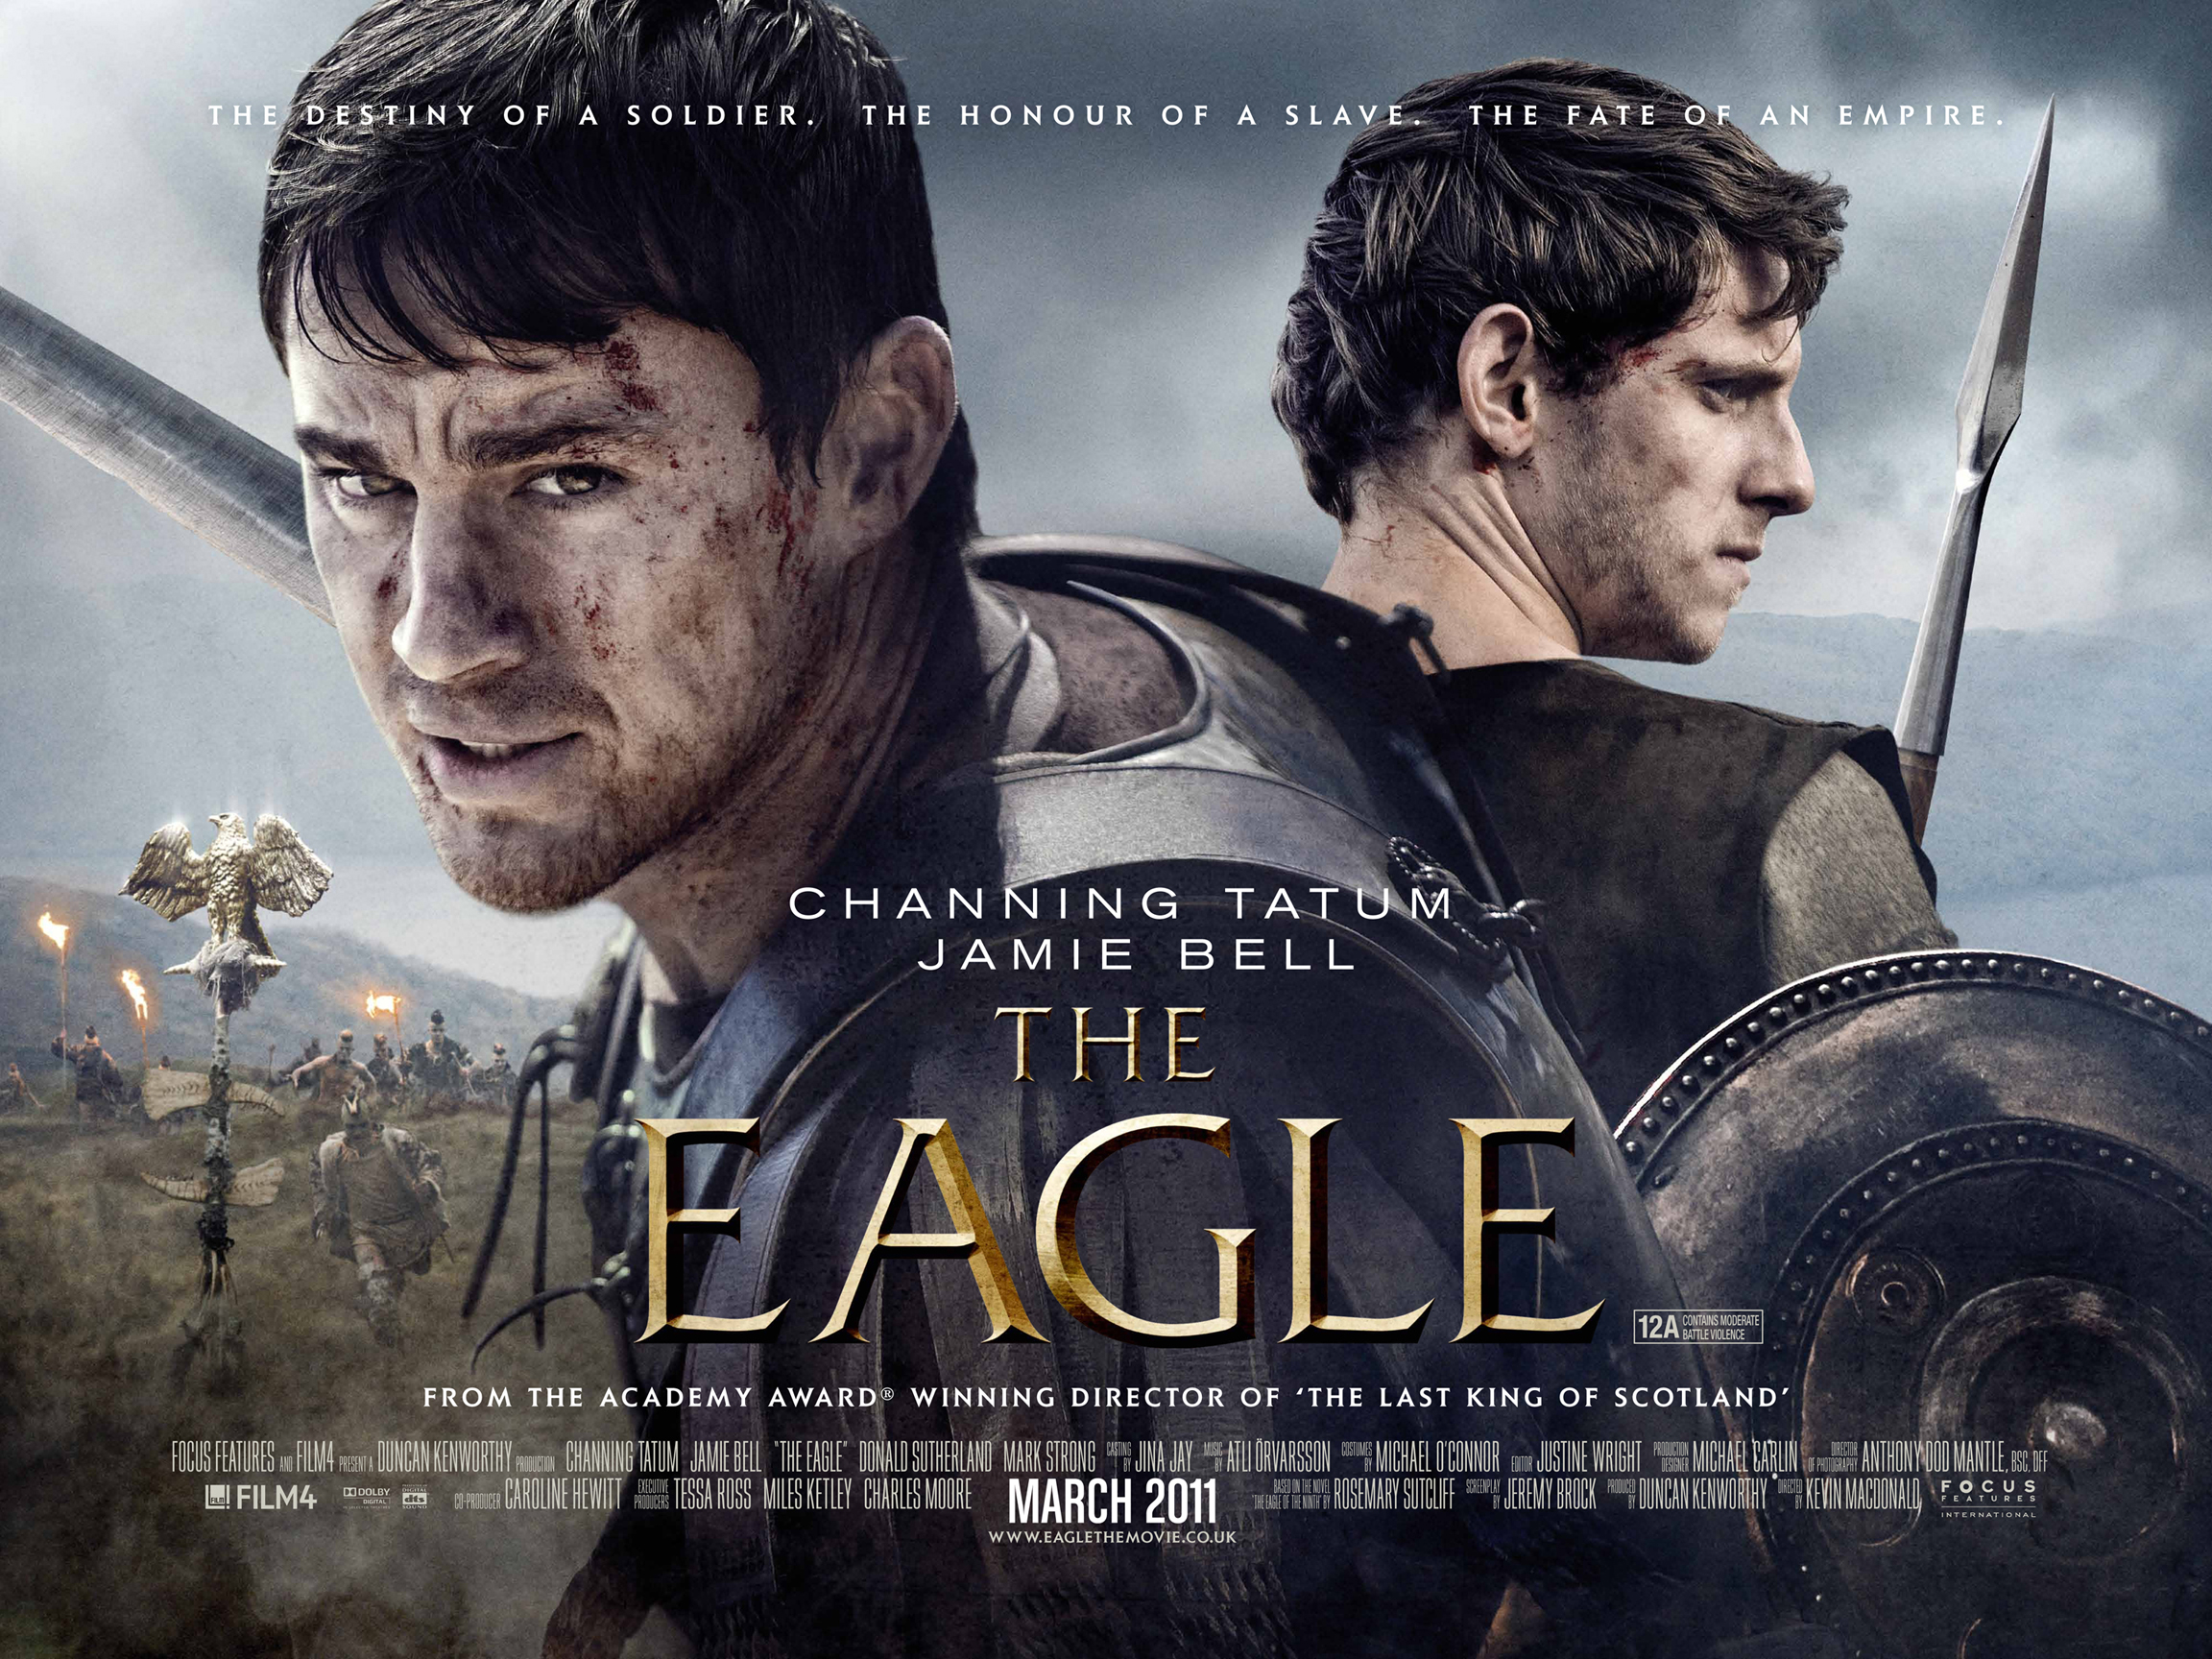 Wallpaper, poster, Channing Tatum, screenshot, pc game, album cover, action film, the eagle, jamie bell 2304x1728